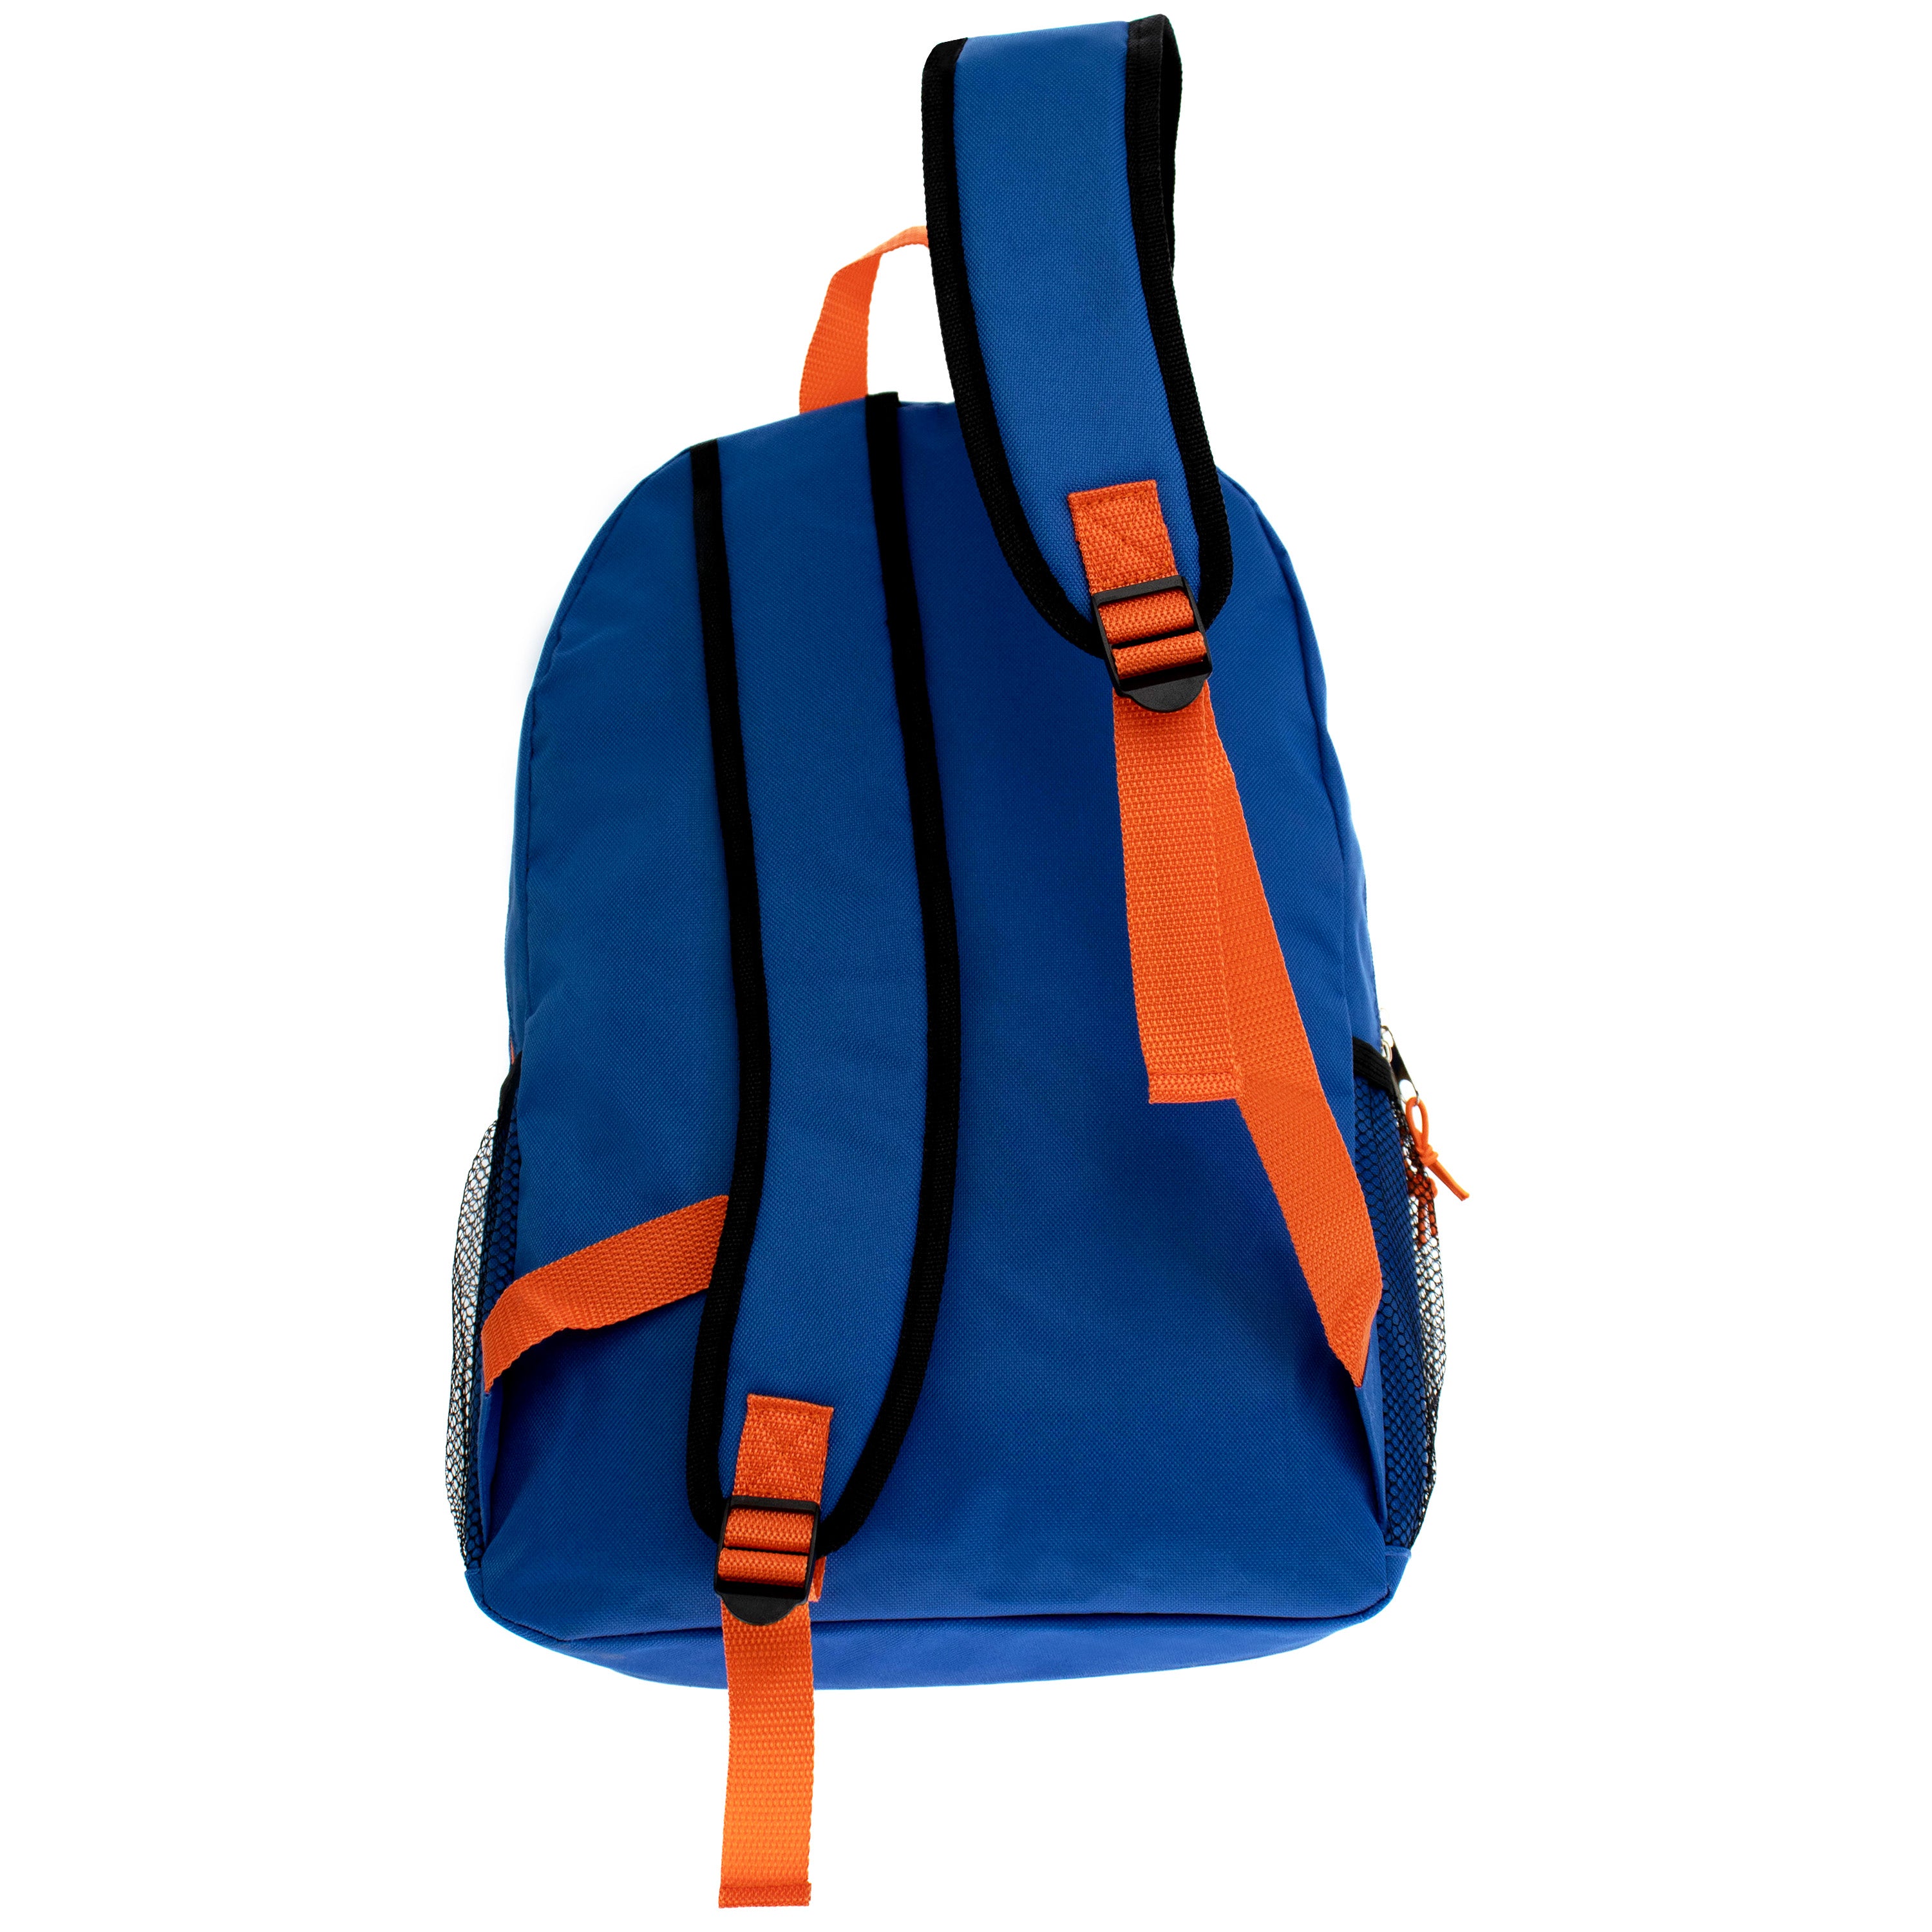 12 Bungee Style 17" Wholesale Backpacks in Assorted Colors & 12 Bulk School Supply Kits of Your Choice